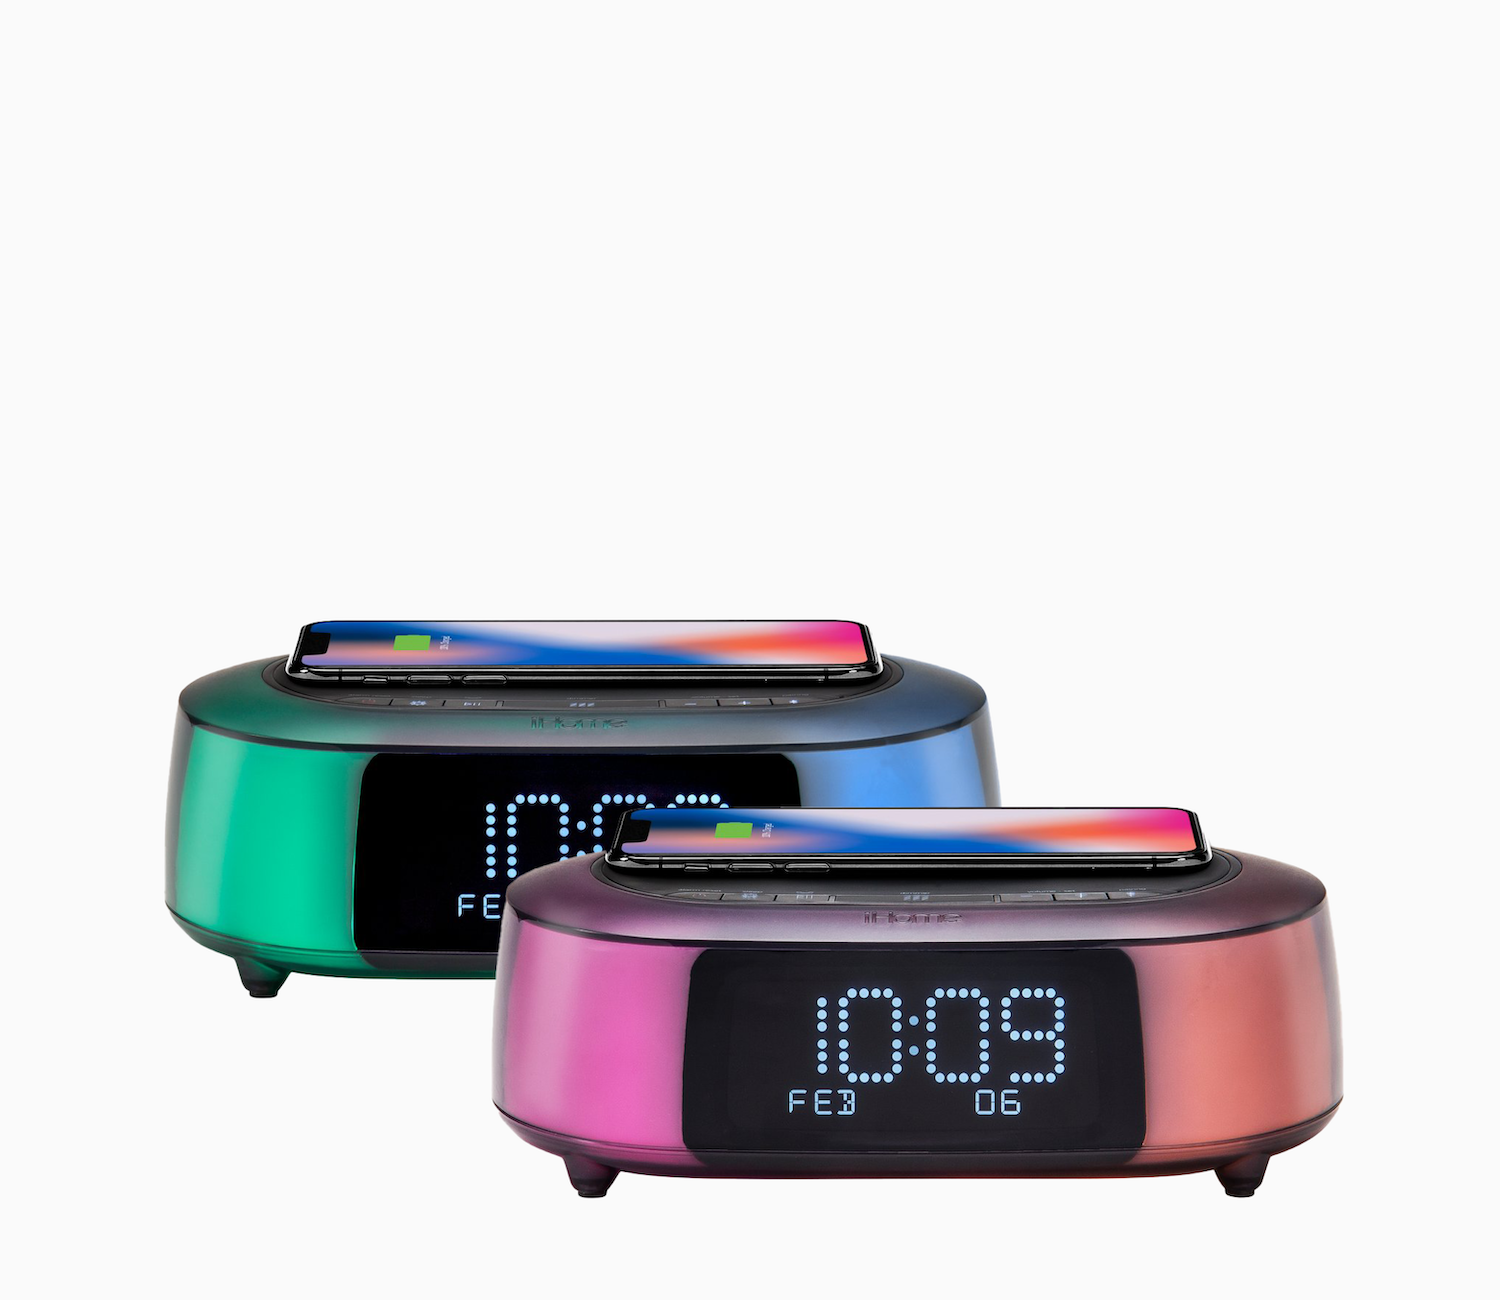 iHome POWERVALET Quad 4-in-1 Dual Qi Wireless Fast Charging, Airpod  Charging, Apple Watch Charging, and USB Charging Alarm Clock, 30W Total  Power Output (iWW33) : Amazon.in: Electronics